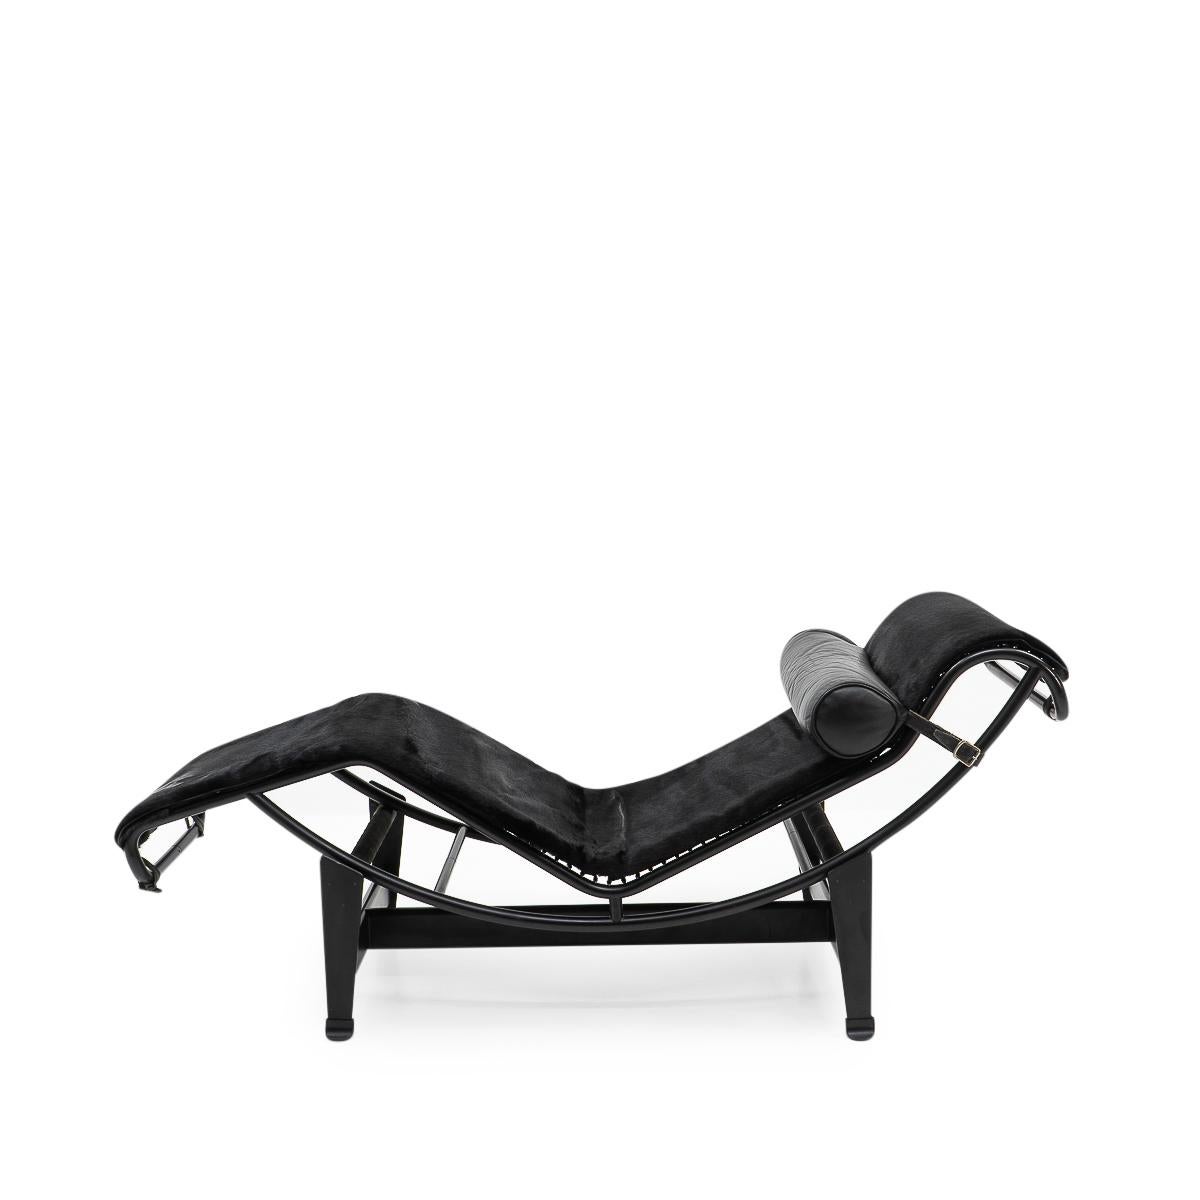 Probably the most well-known piece by the Swiss-born architect Le Corbusier (Charles-Edouard Jeanneret) is the chaise-longue model LC4. Le Corbusier hardly needs an introduction, his works span from furniture, buildings, cities, tapestries, to